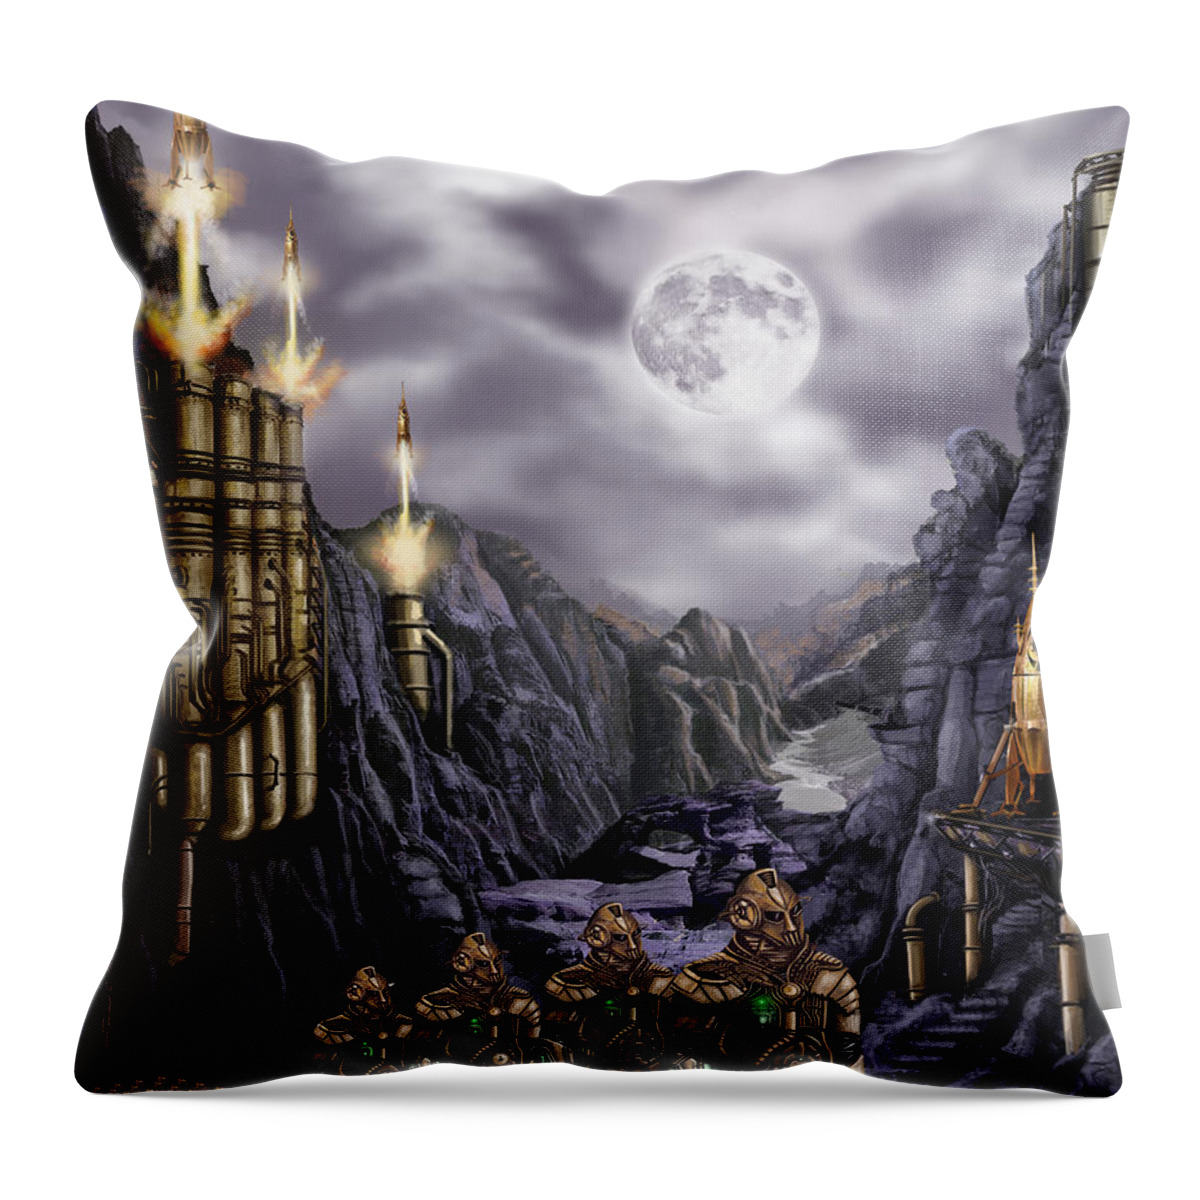 Steampunk Throw Pillow featuring the painting Steampunk Moon Invasion by James Hill